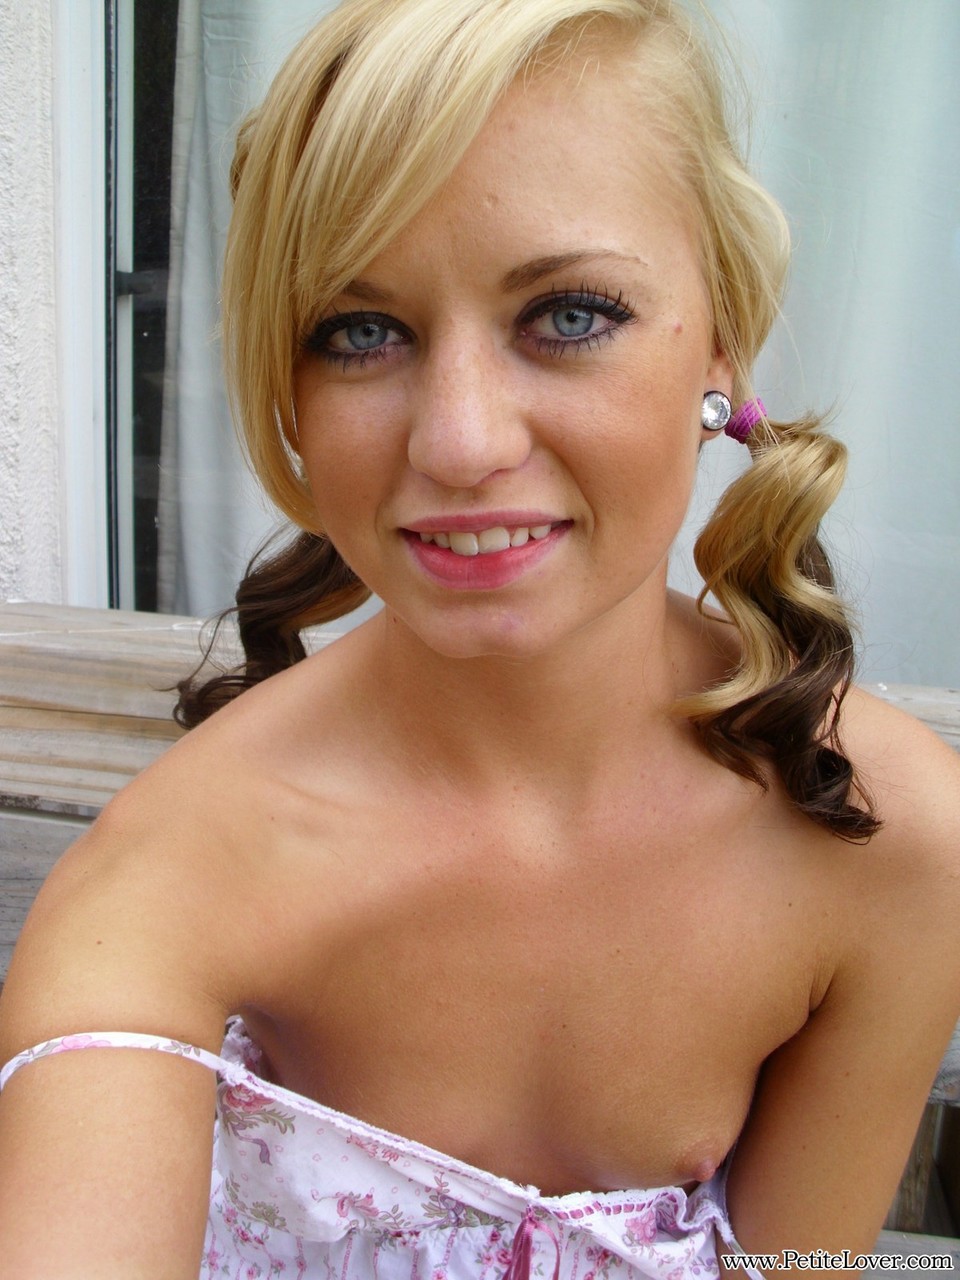 Cute blonde Tiff in pigtails showing off her wee small tits & tiny bald pussy porno fotky #428478640 | Petite Lover Pics, Tiff, Amateur, mobilní porno